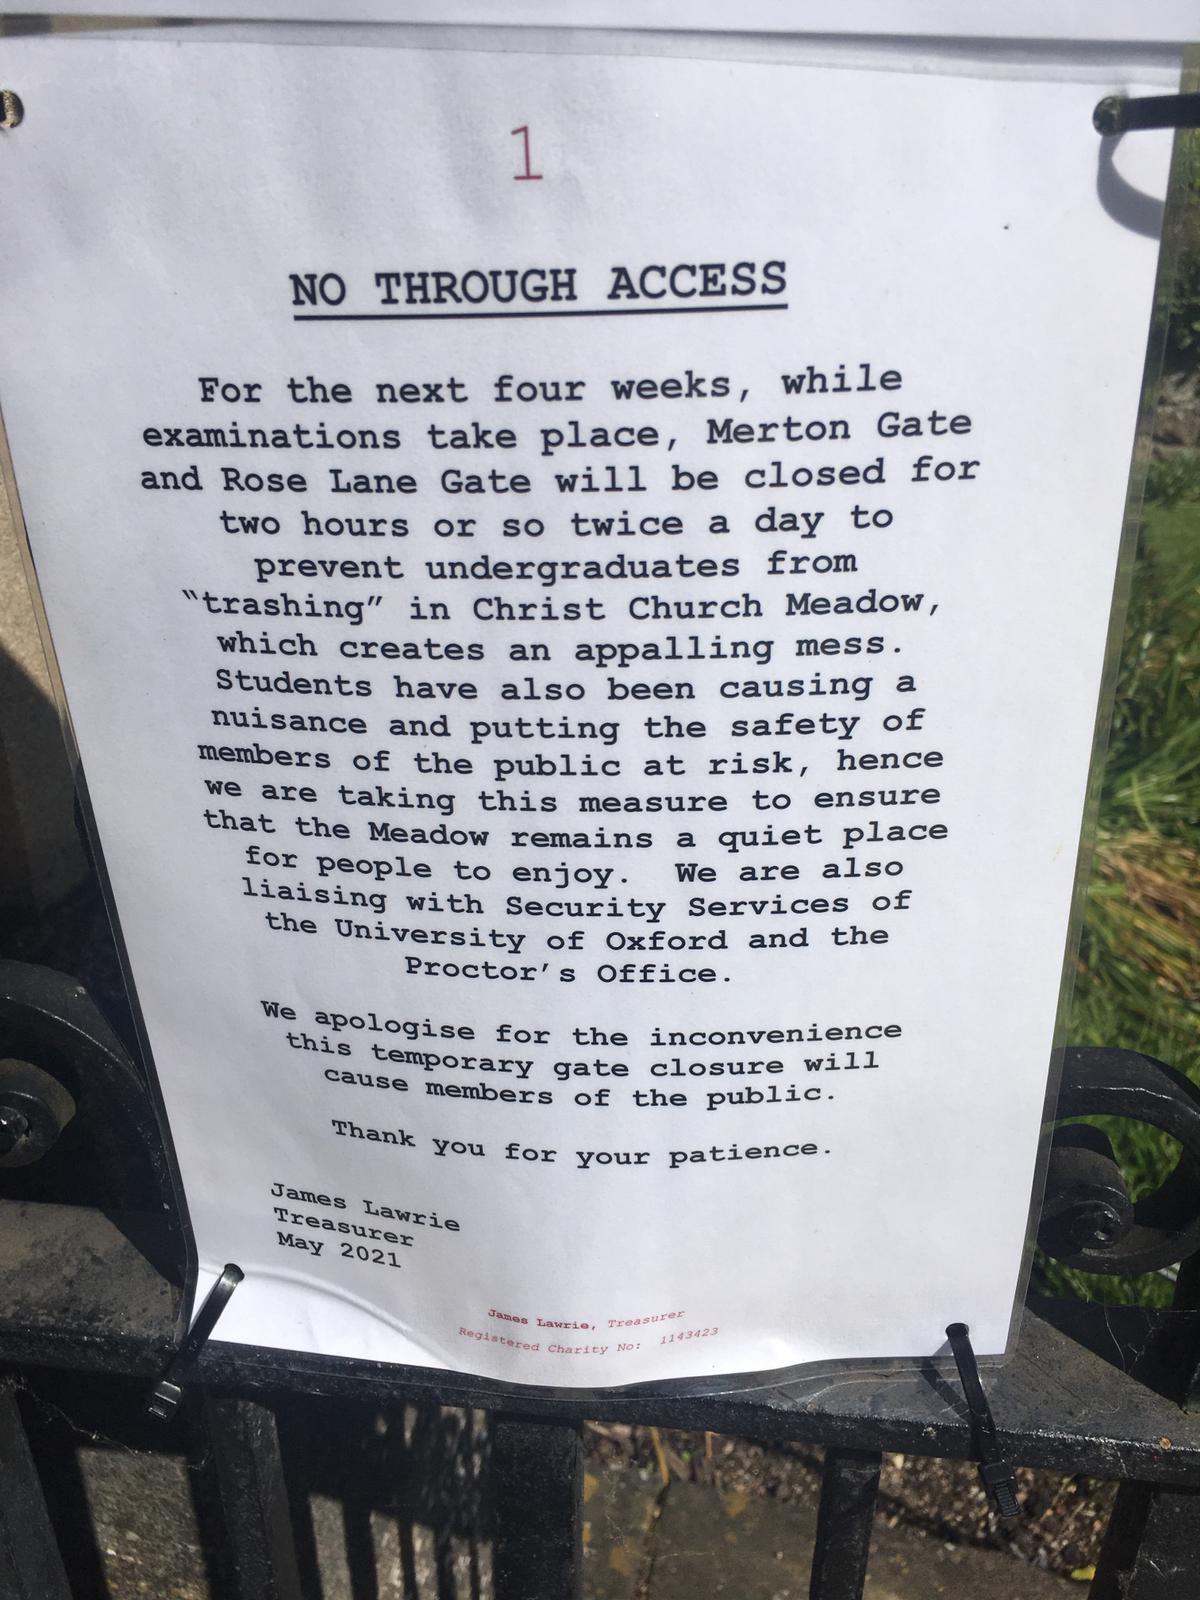 A notice at the gate of Christ Church Meadow explaining it is closed due to trashing.